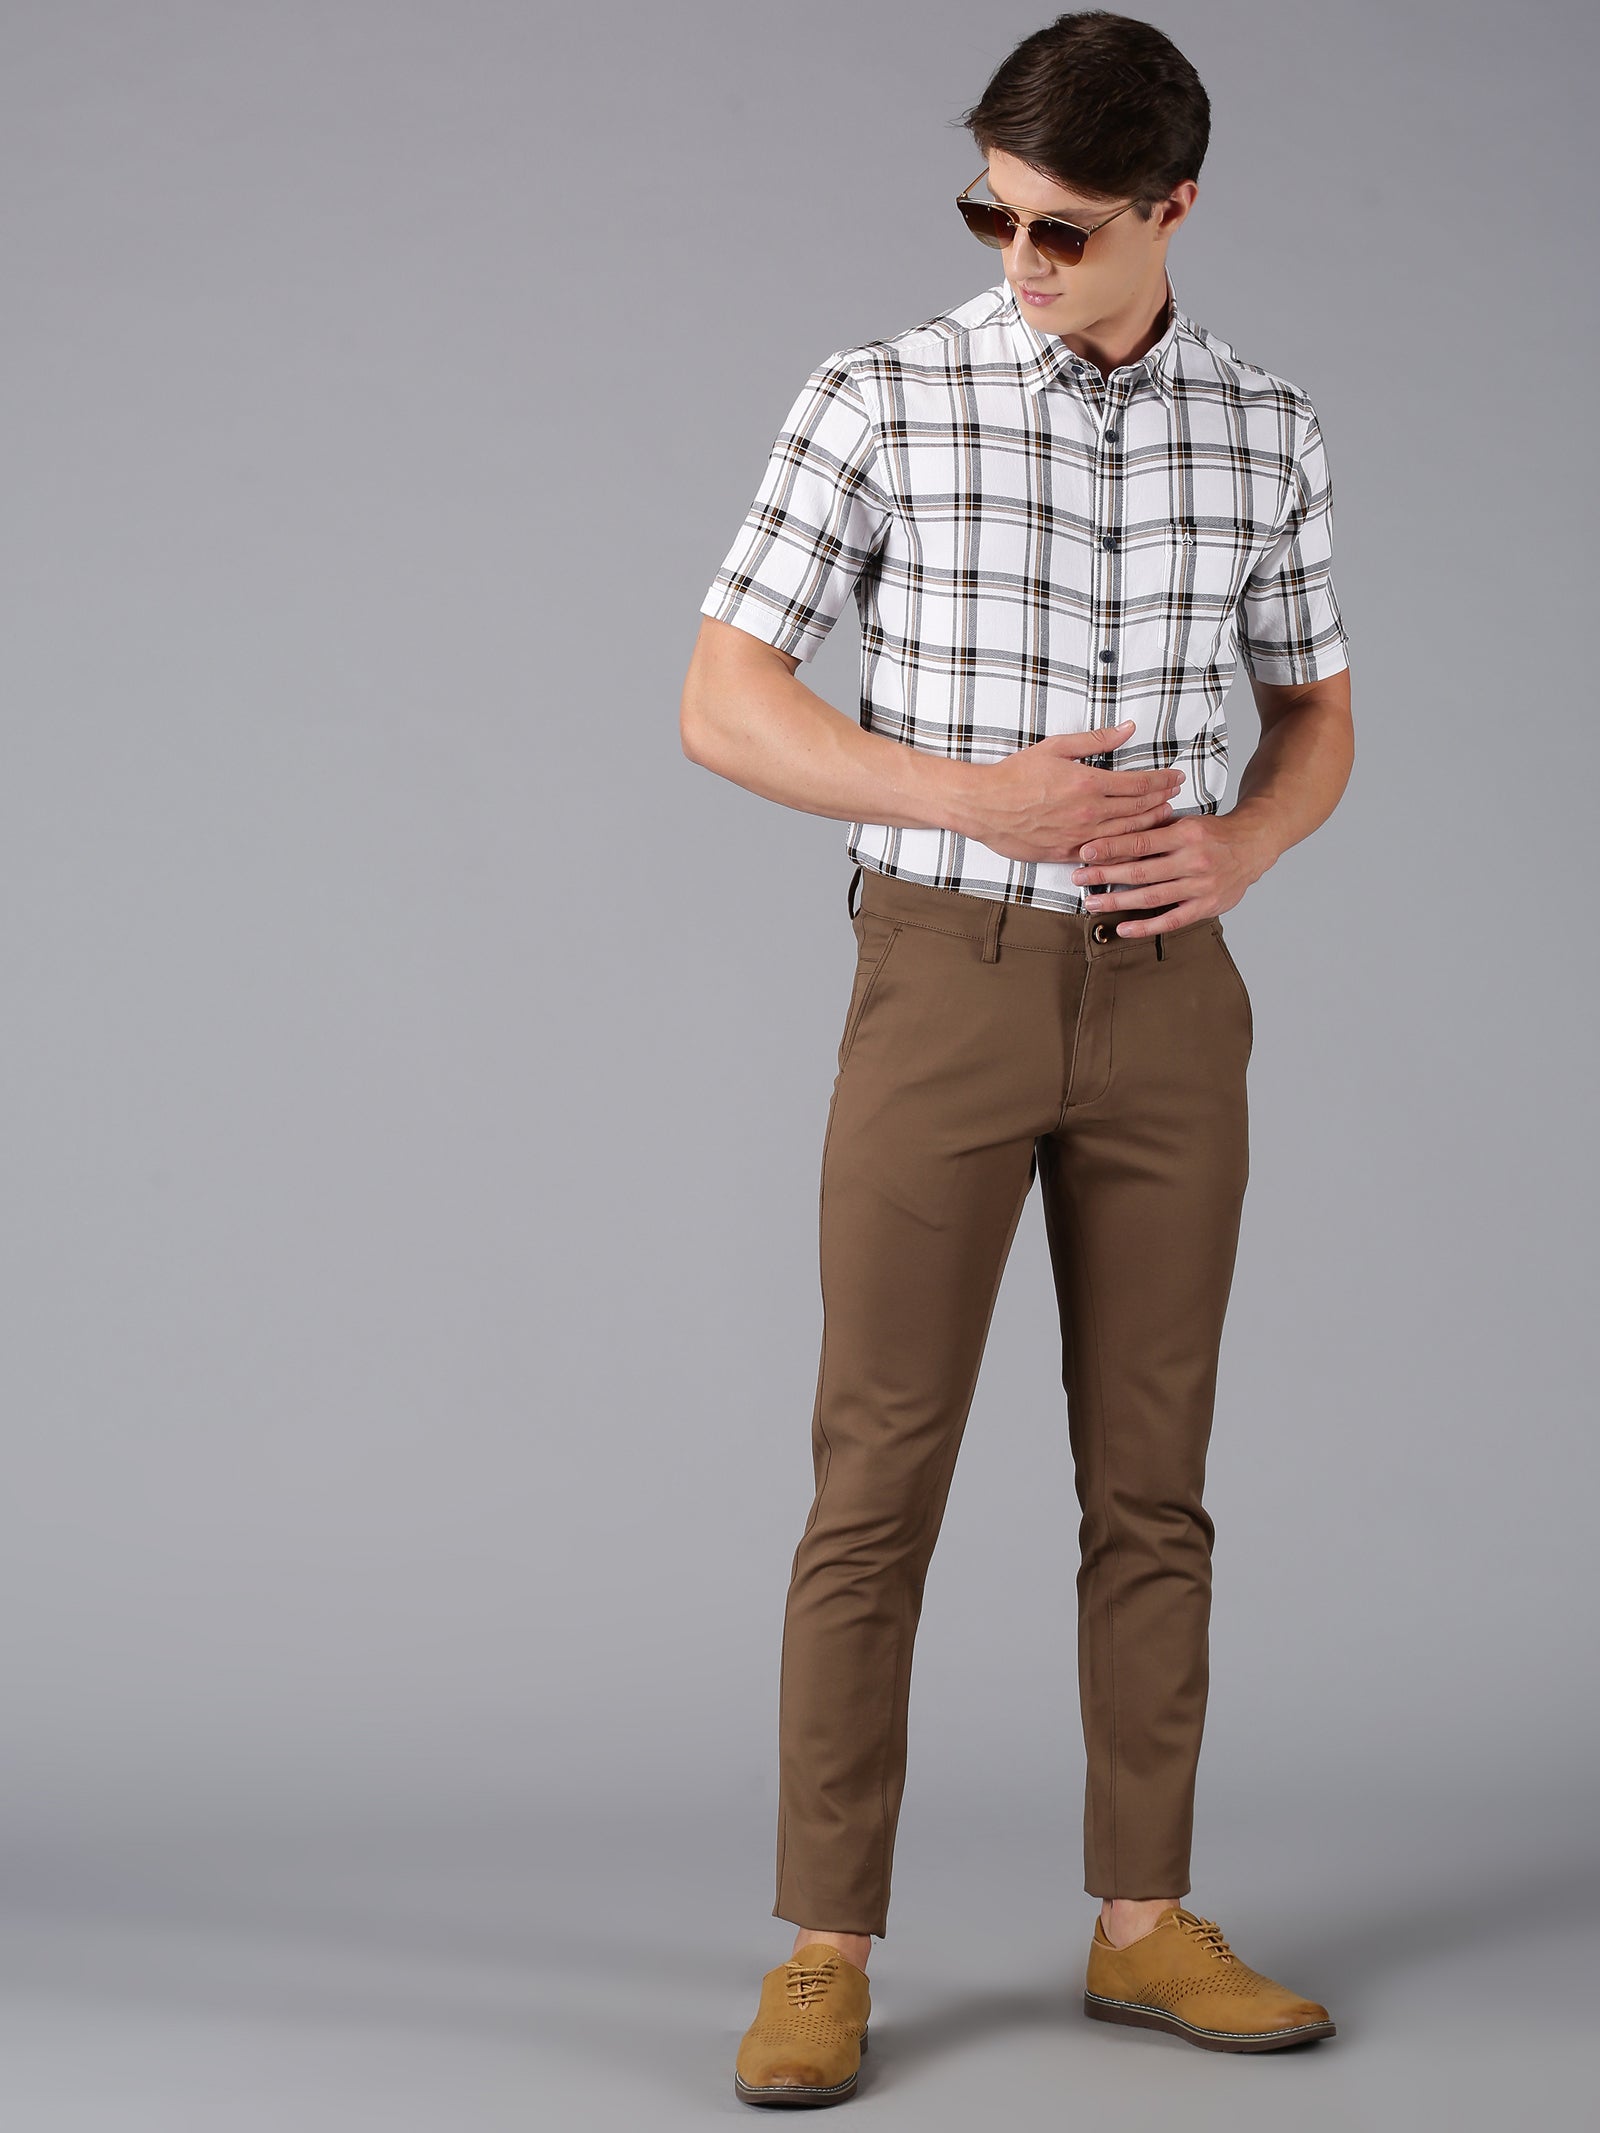 What Color Shirt Goes With Dark Brown Pants And Jeans  Ready Sleek